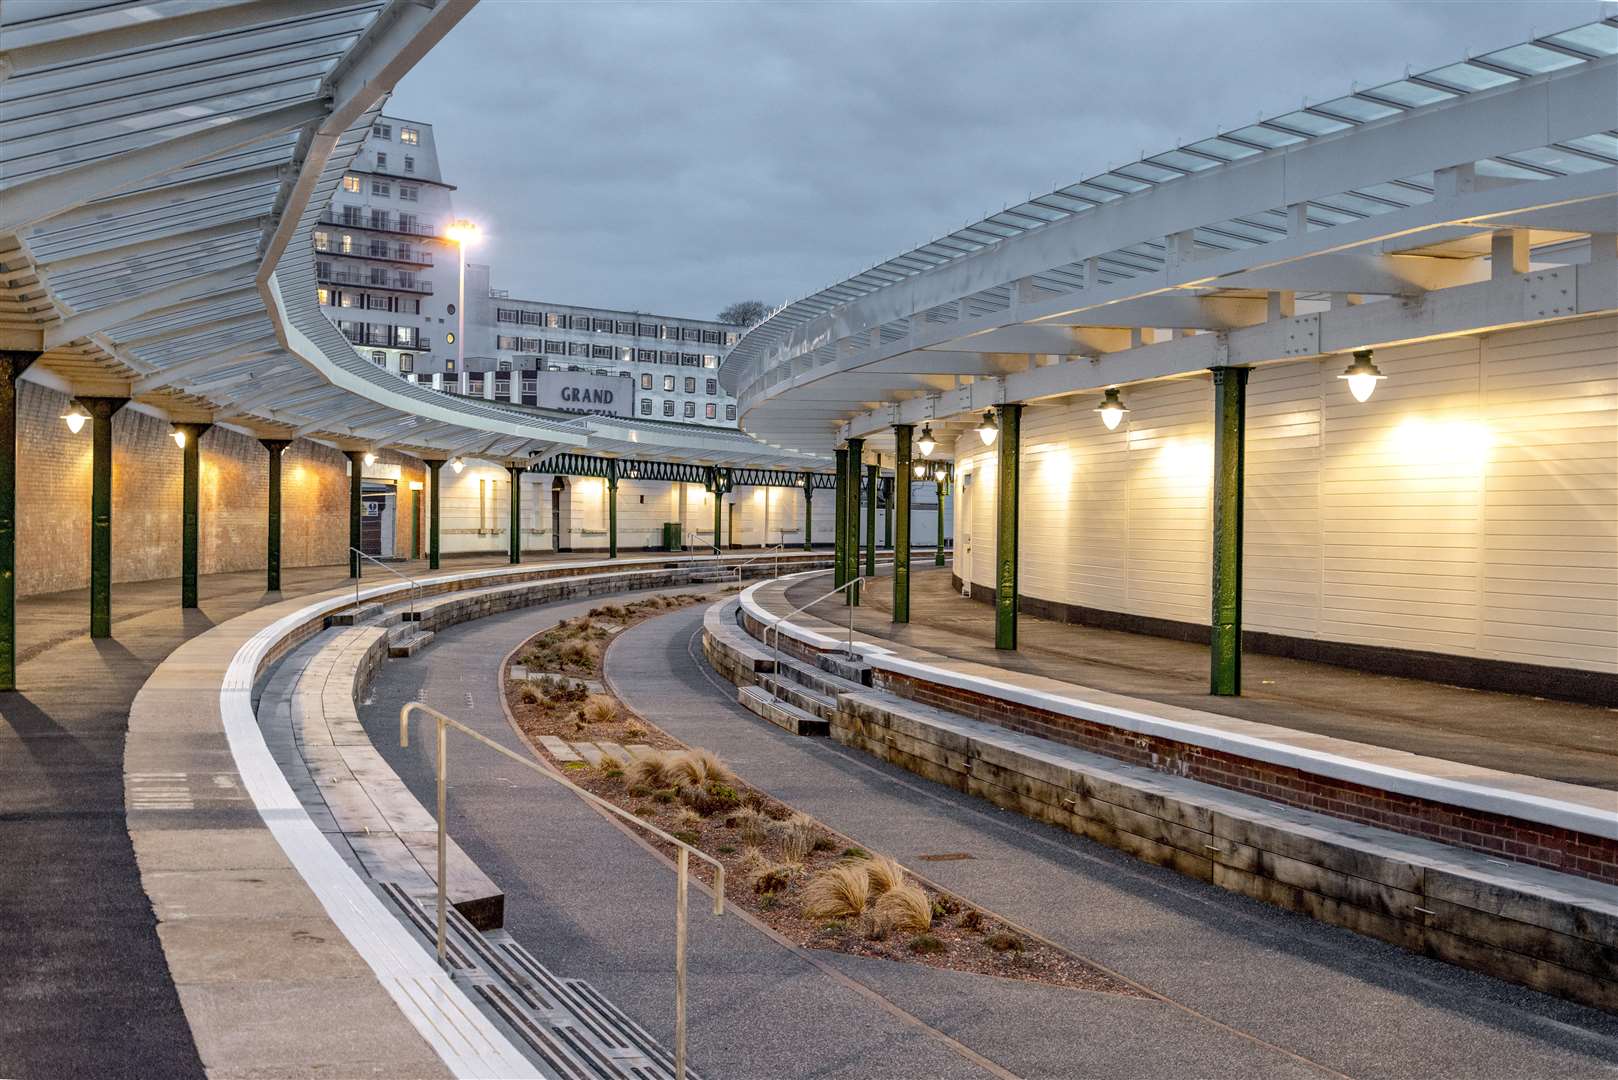 The restored station unveiled